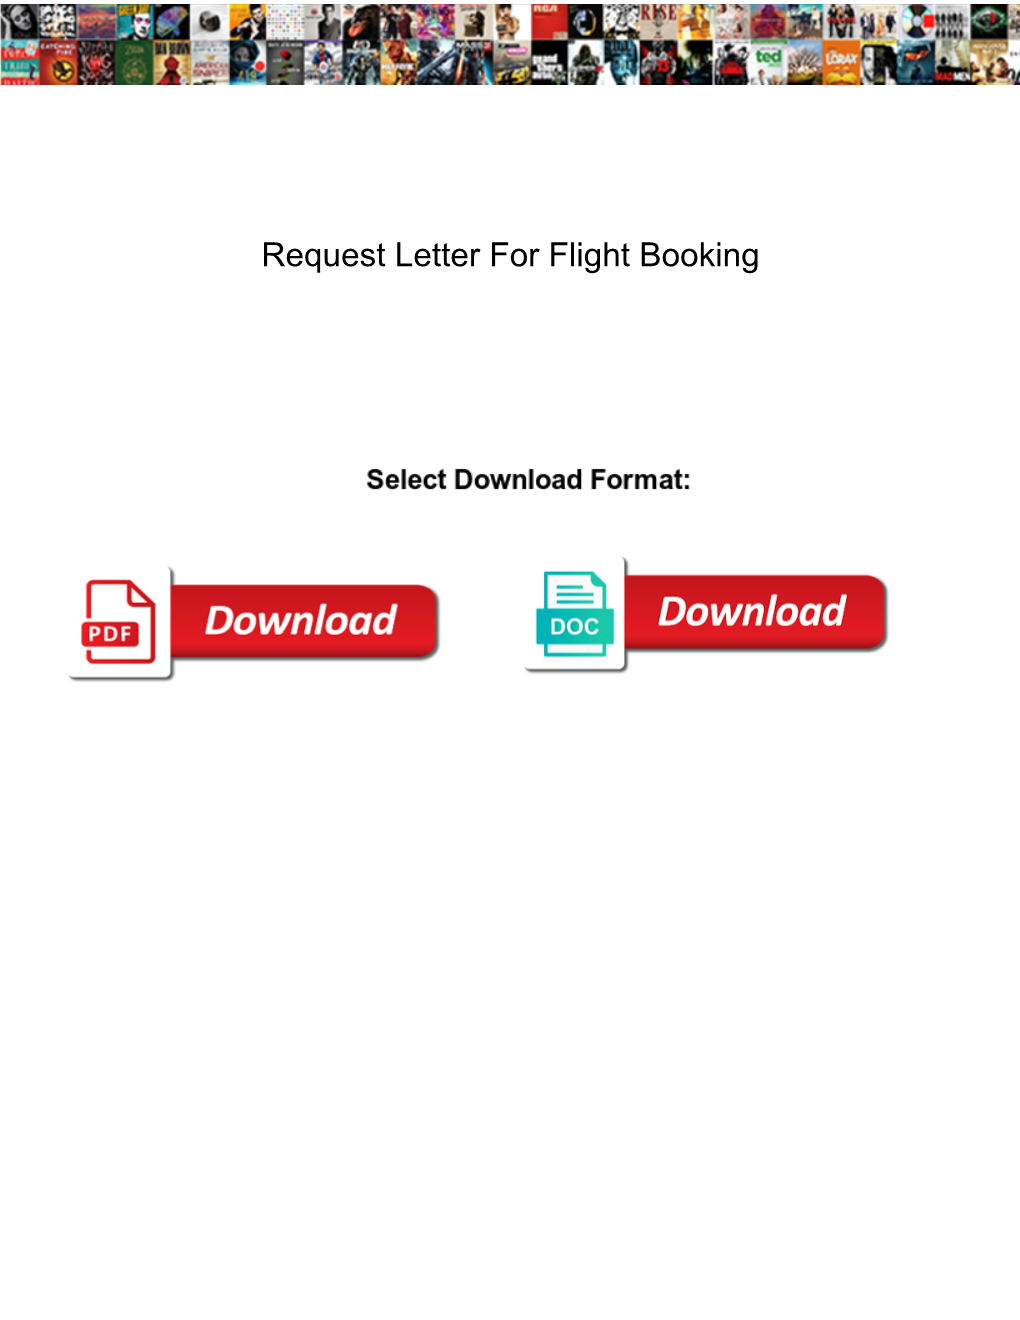 Request Letter for Flight Booking